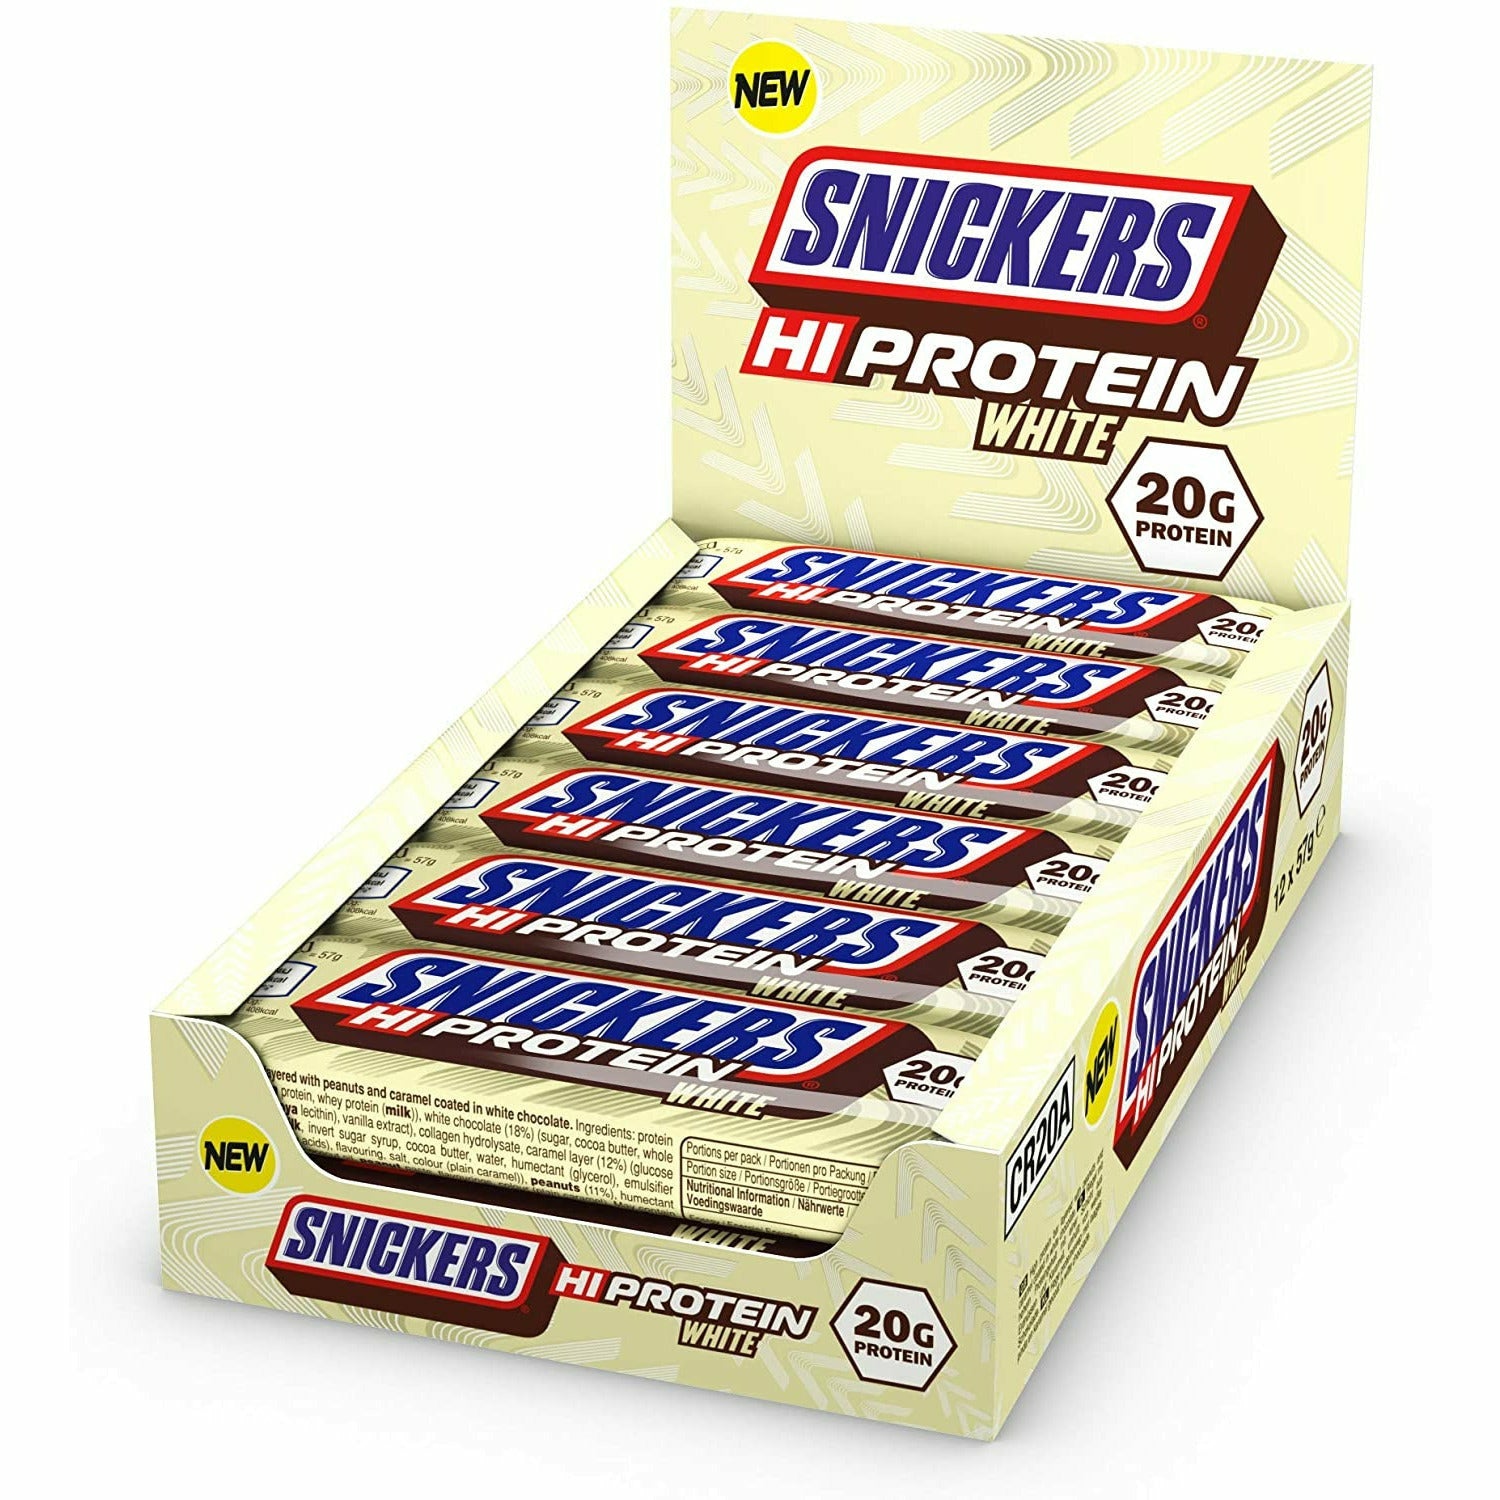 Mars Brand Hi-Protein Bar (1 BOX of 12) Protein Snacks Snickers White Chocolate BEST BY JAN/2023 Mars Brand